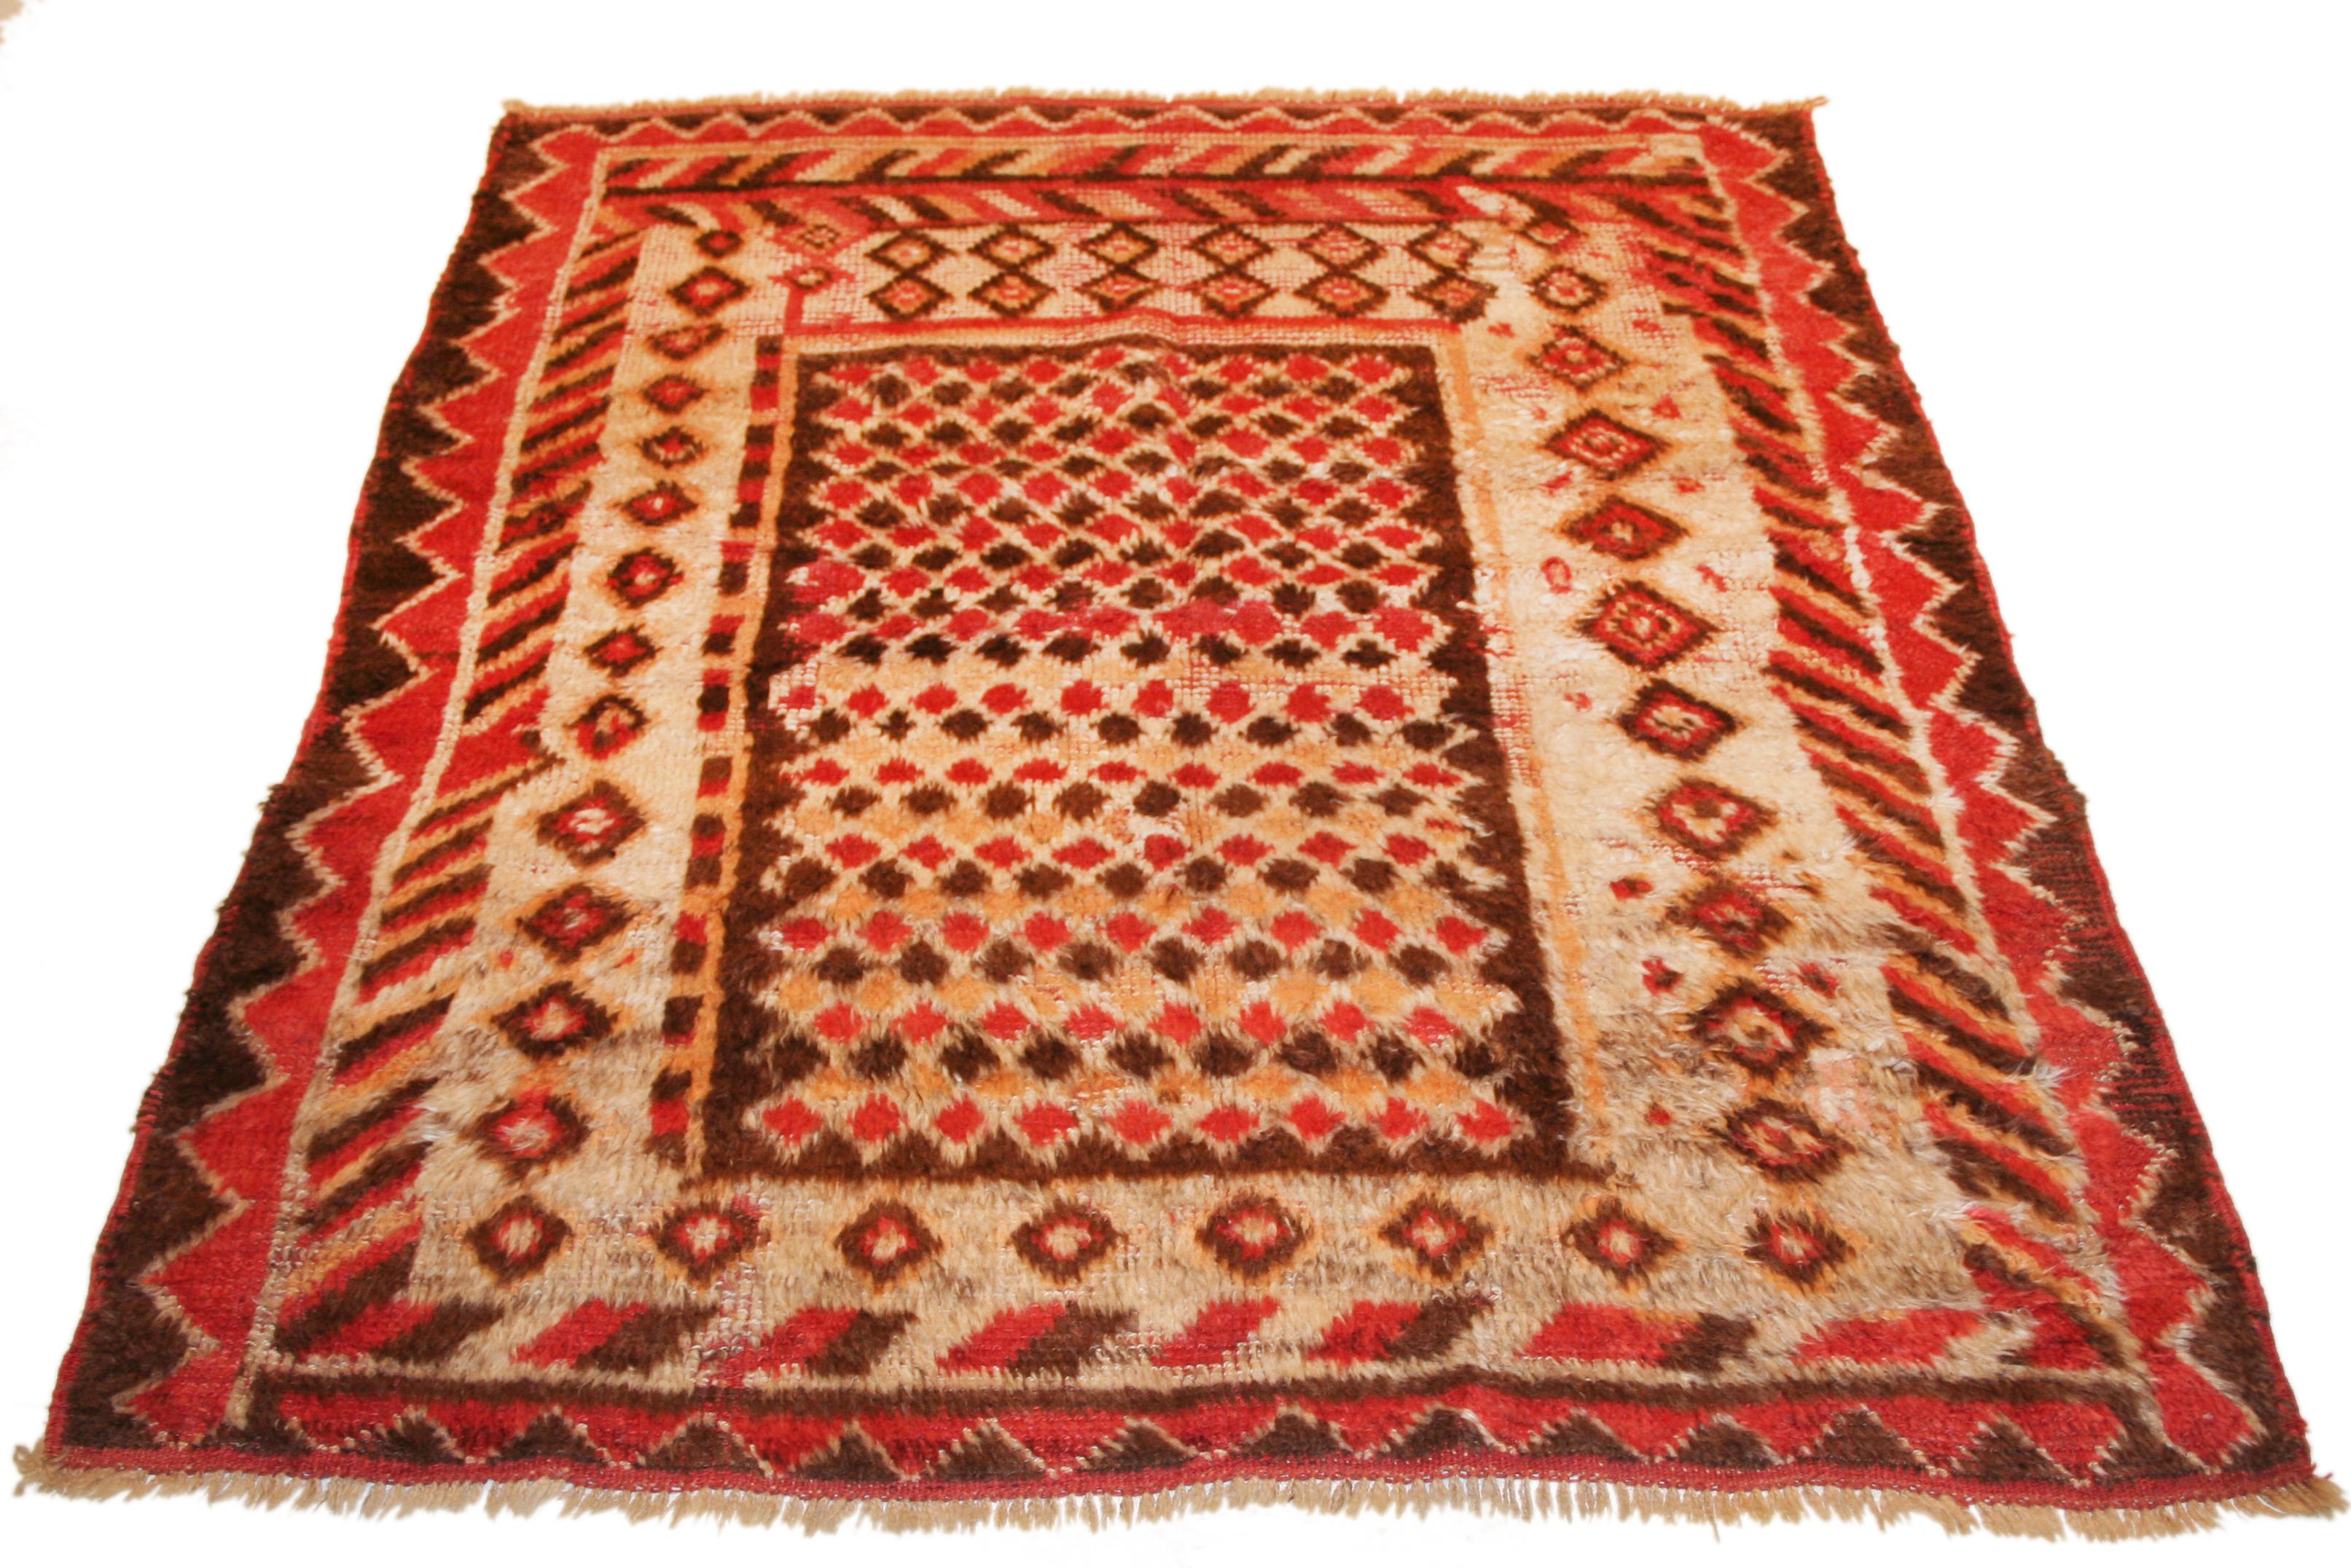 Tulu rugs represent one of the earliest forms of nomadic pile weaving, typically knotted with a medium-high pile as these were intended as bedding rugs for the tent. The patterns are quite simple, ranging from completely open fields to stacked